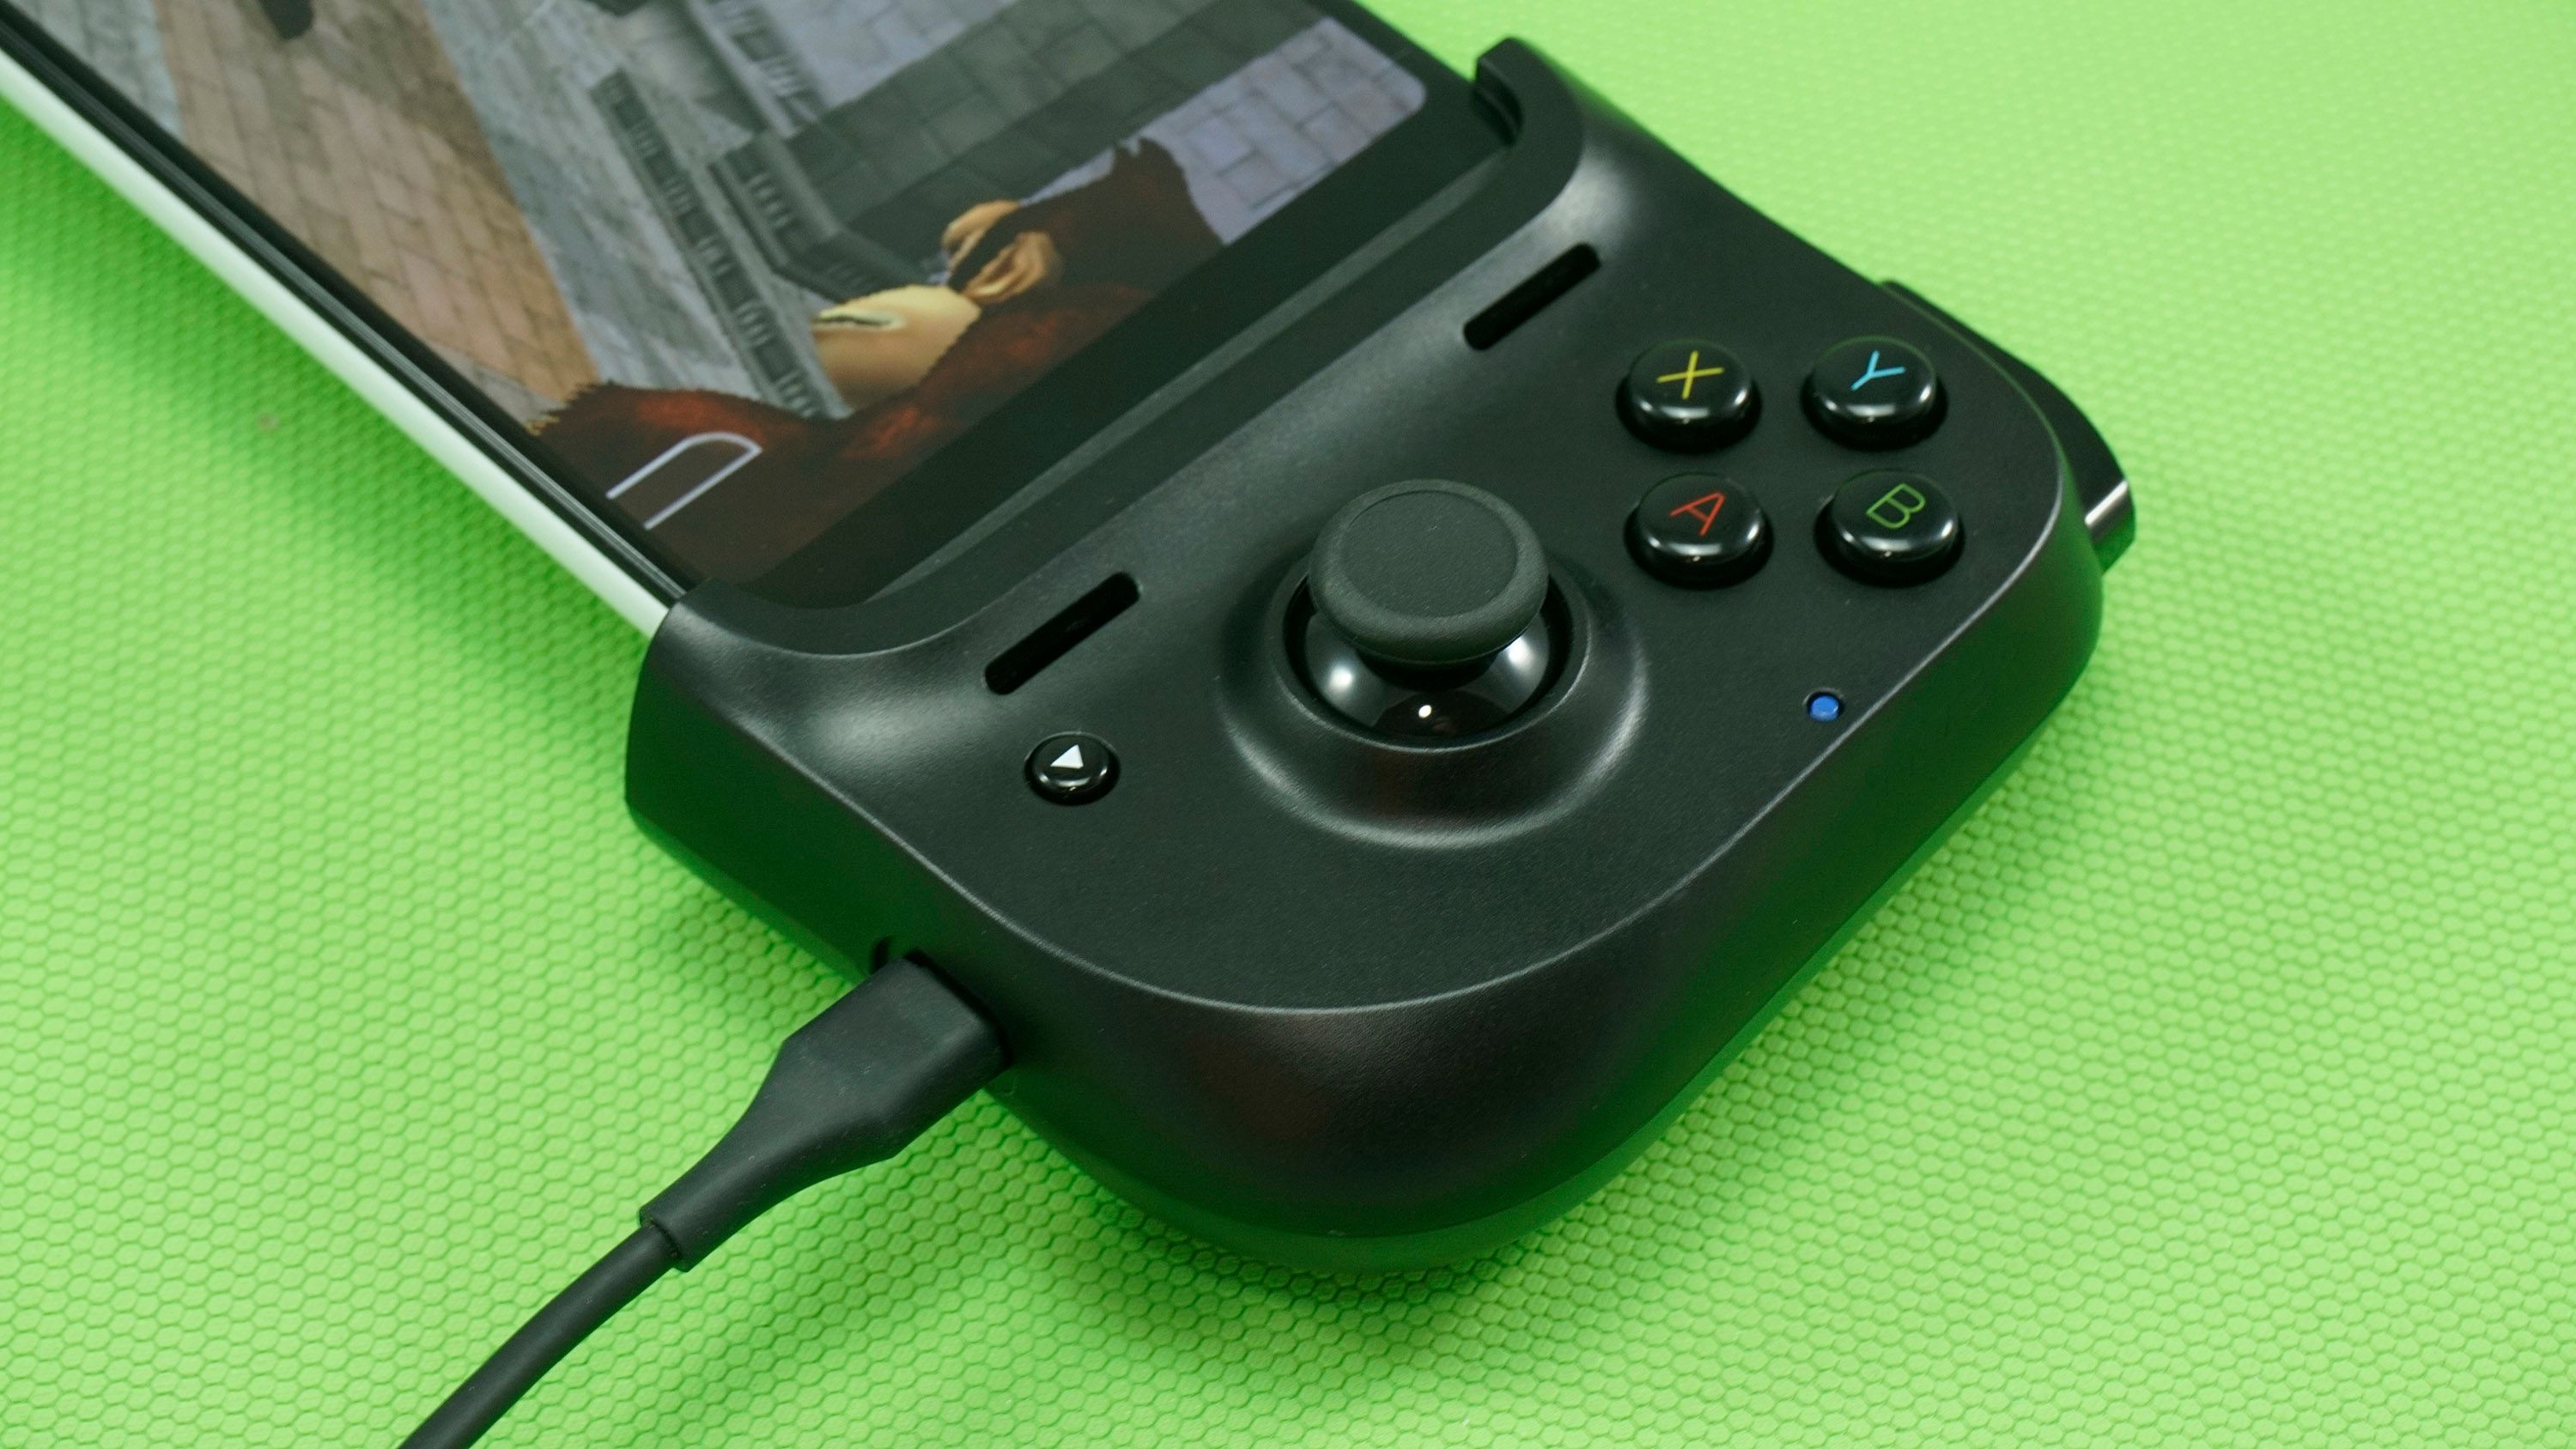 Razer Kishi review: A must-have mobile gaming accessory